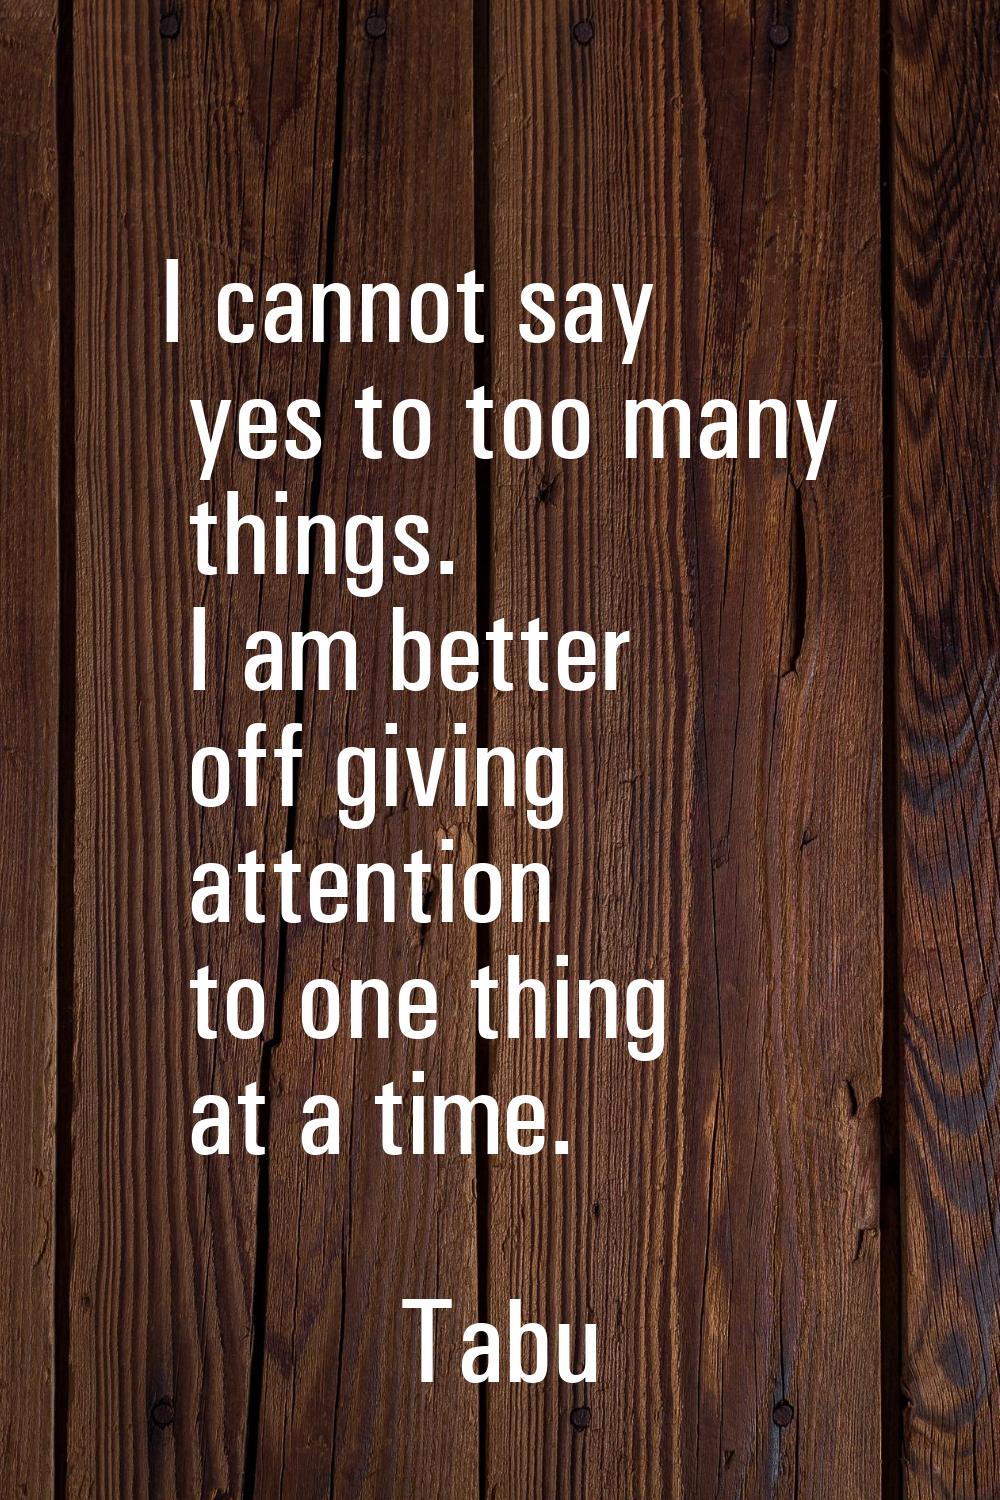 I cannot say yes to too many things. I am better off giving attention to one thing at a time.